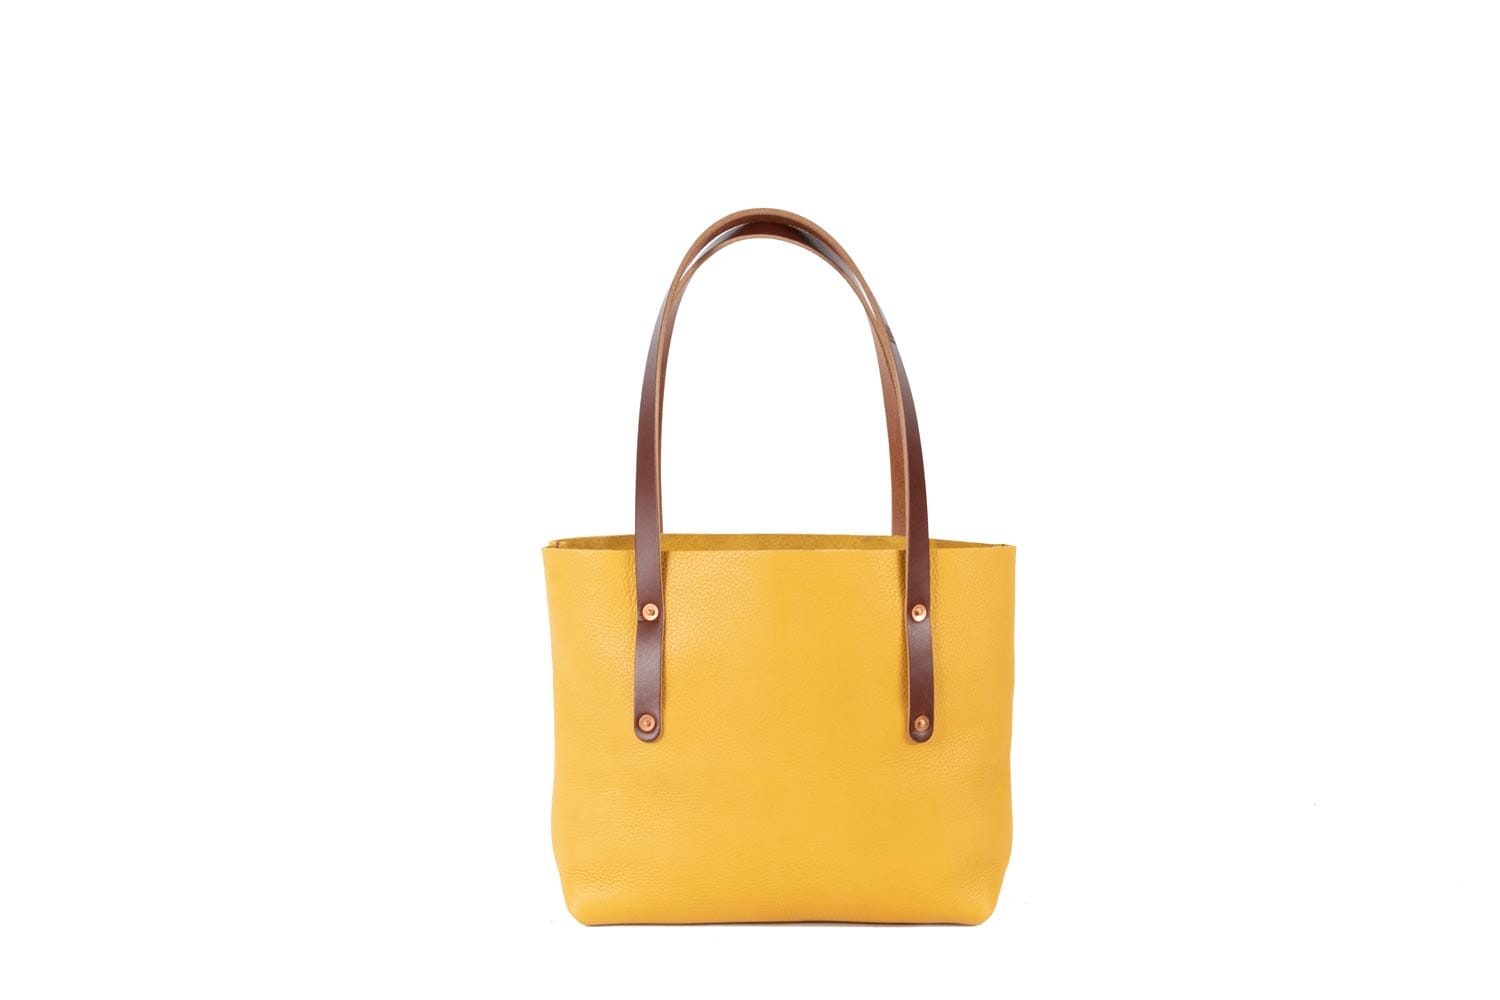 AVERY LEATHER TOTE BAG - SMALL - GOLDEN SUN